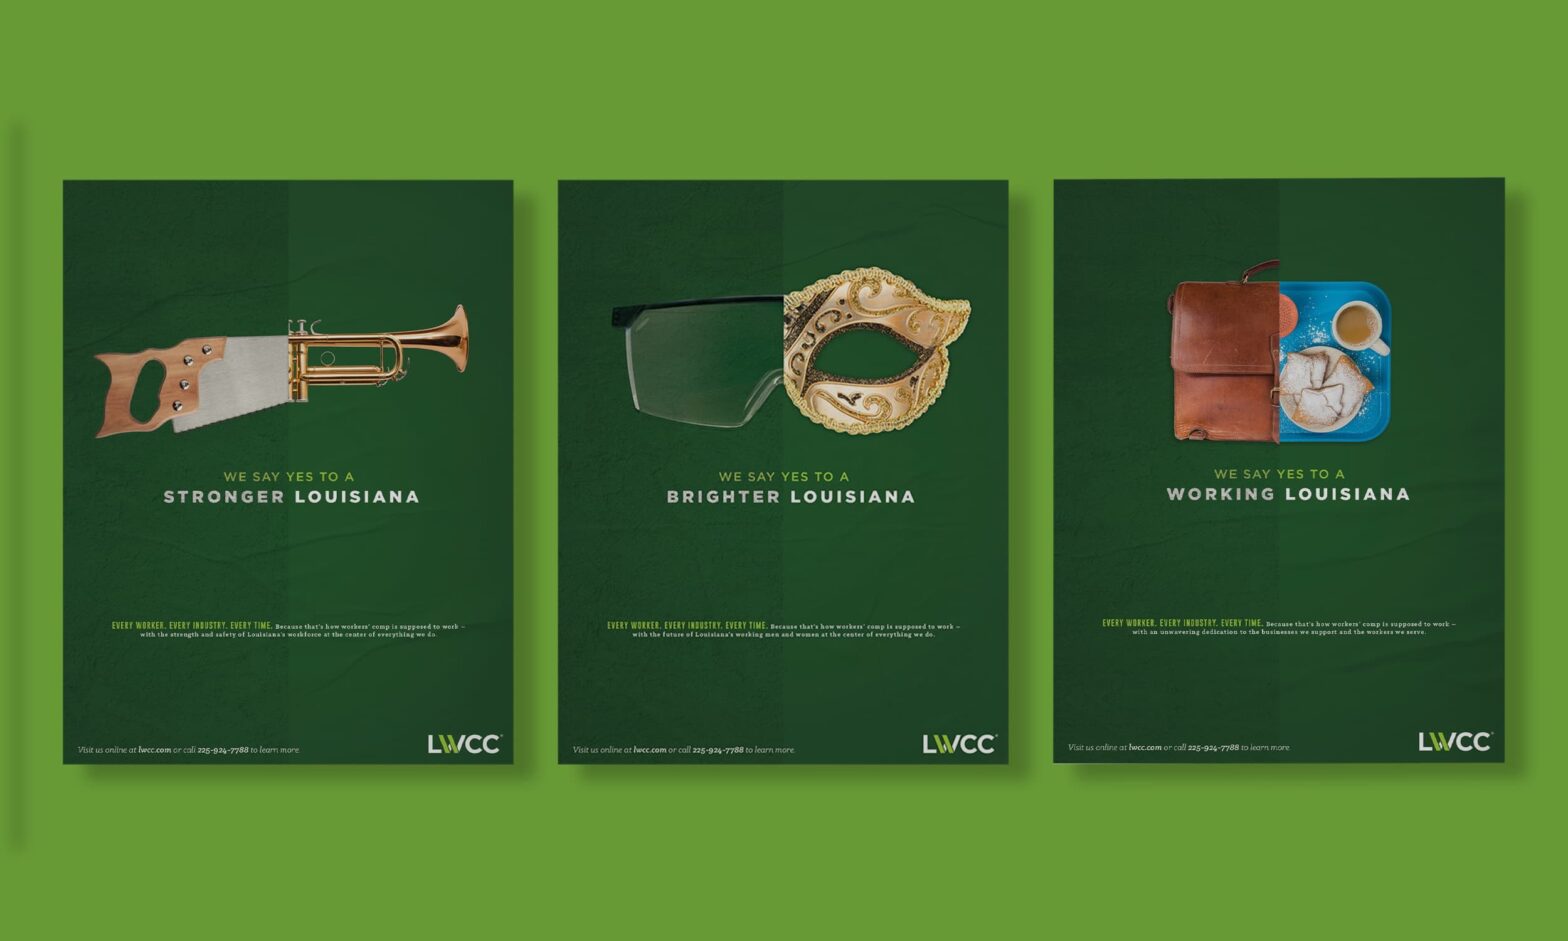 Mockup of 3 LWCC print ads with photo illustrations of work and culture images.